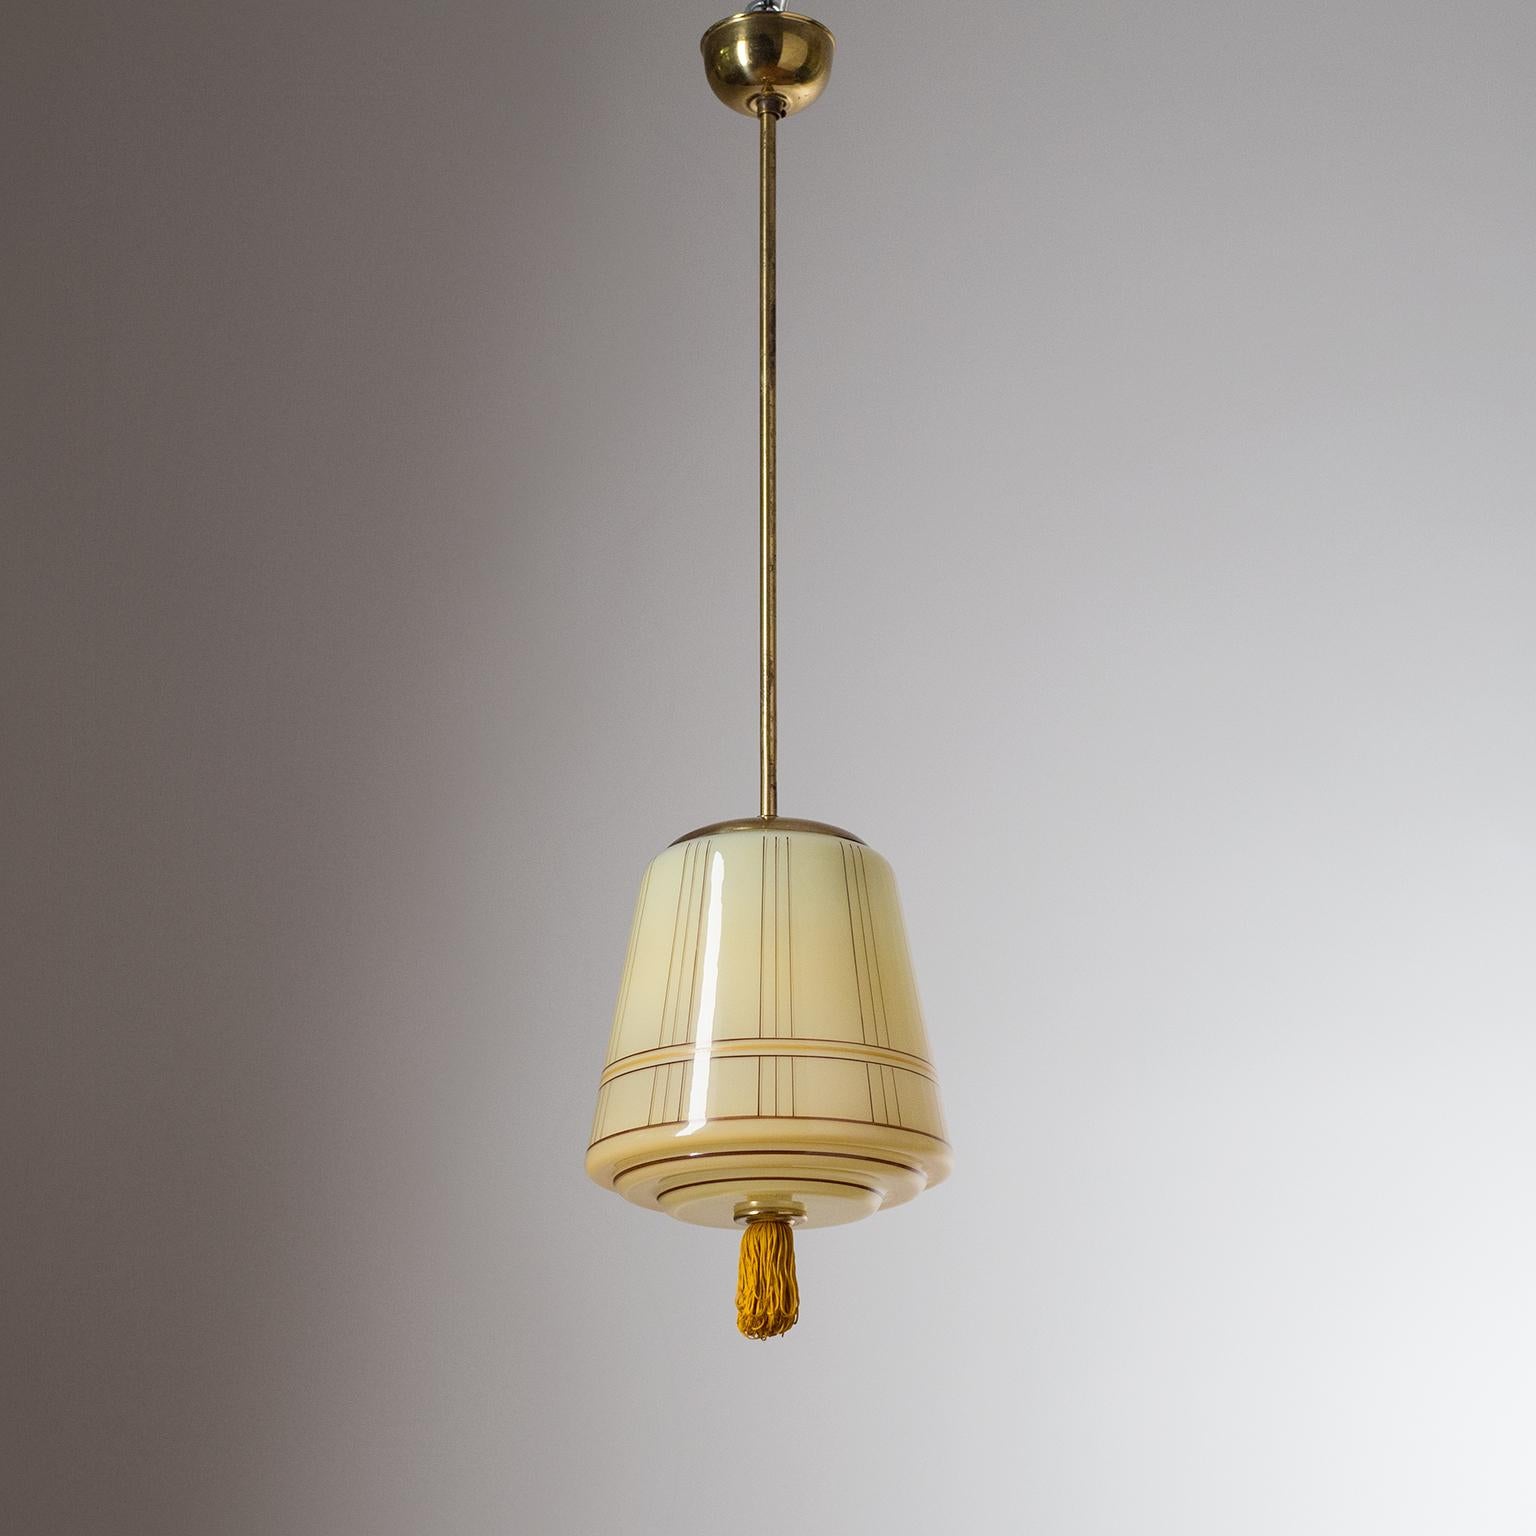 Very fine German Art Deco pendant/lantern, circa 1930. The elegant blown glass diffuser is enameled on the inside with a dark ivory color and has hand painted stripes on the outside as well as a finial tassel. Good condition with some patina on the